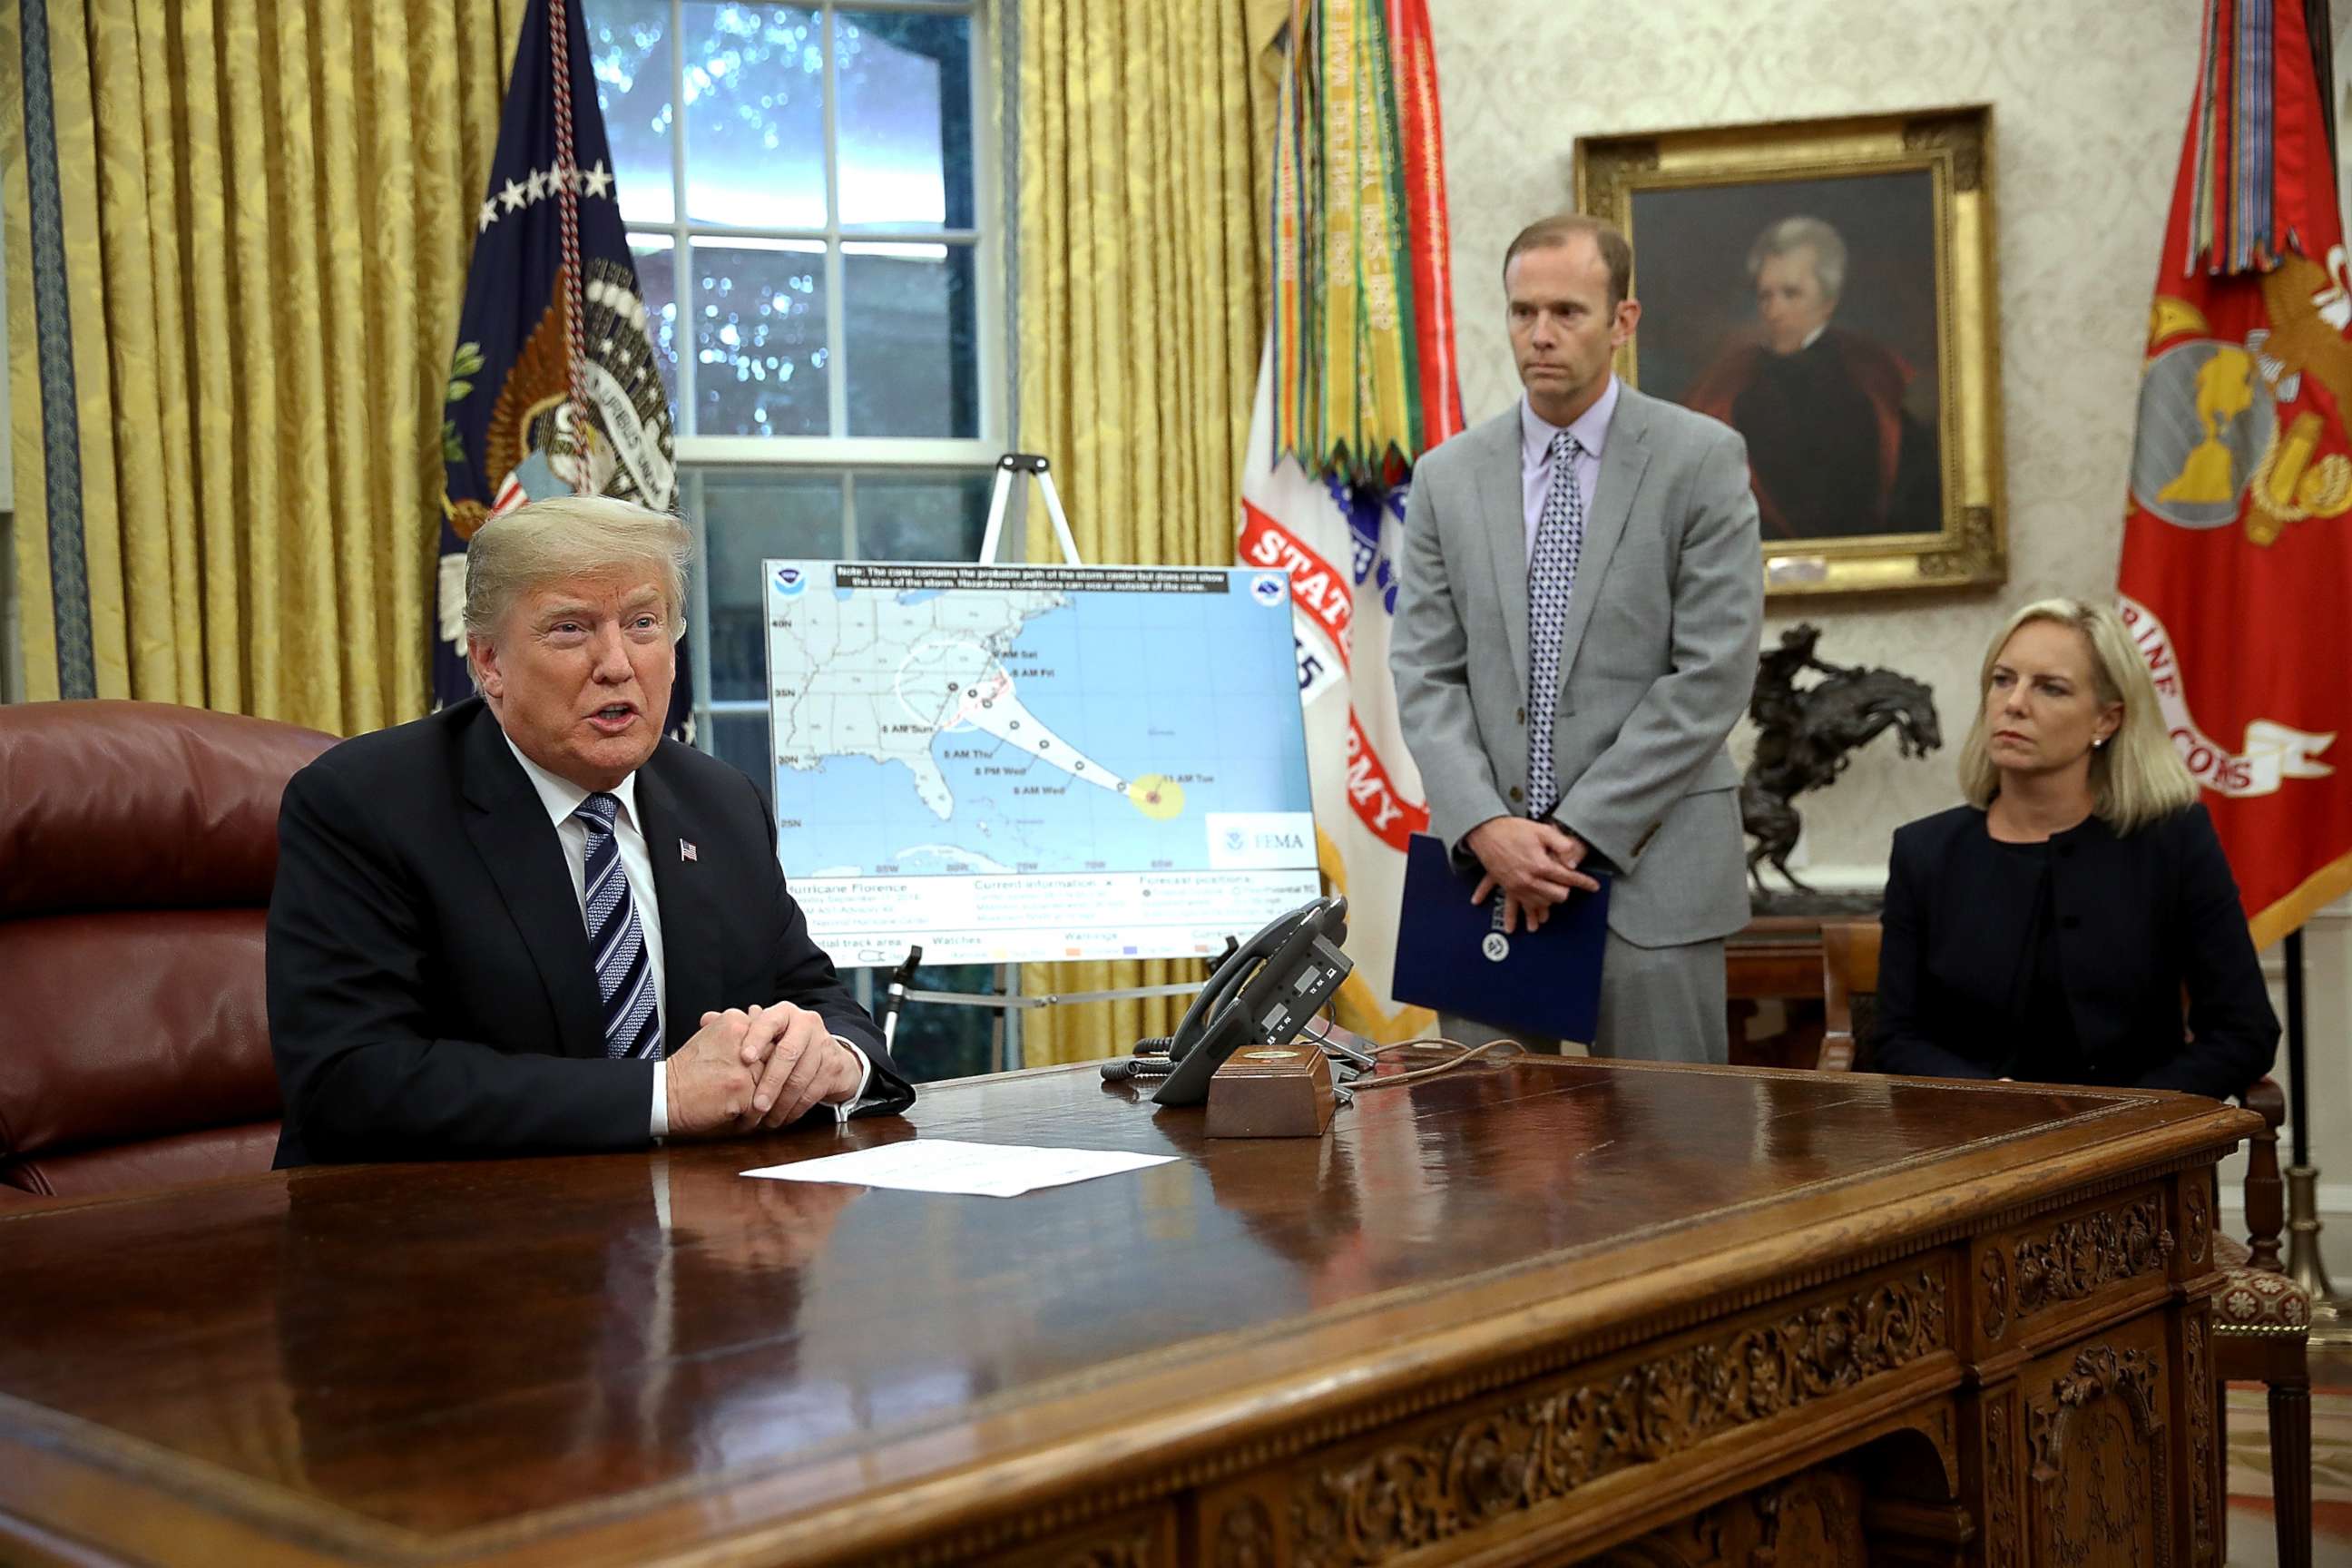 PHOTO: President Donald Trump speaks while meeting with FEMA Administrator Brock Long (C) and Homeland Security Secretary Kirstjen Nielsen in the Oval Office on Sept. 11, 201,8 in Washington, D.C.